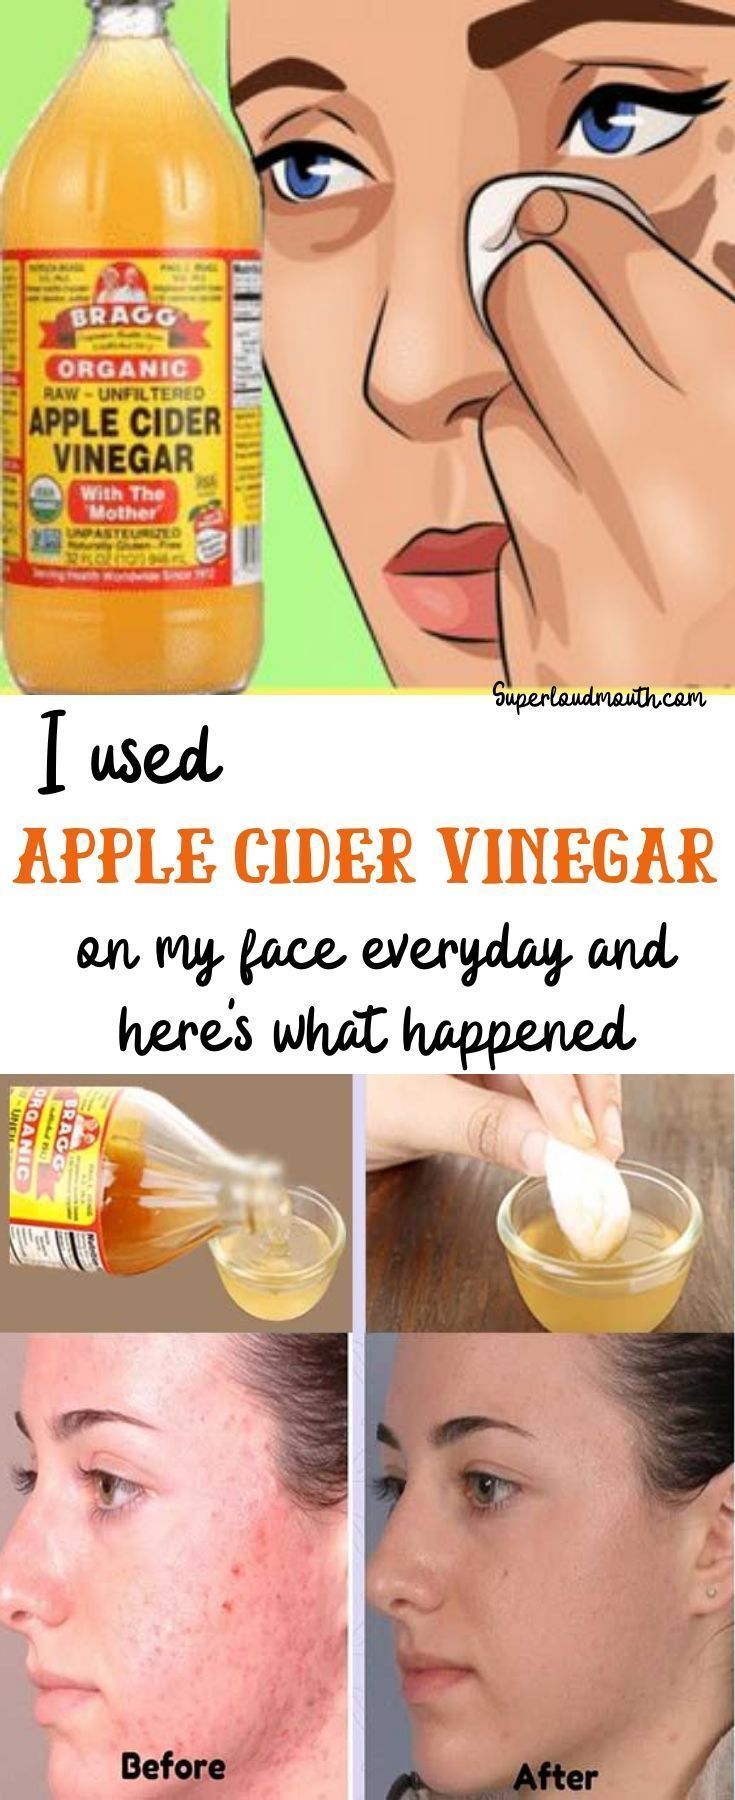 Reasons Why Apple Cider Vinegar Toner Is Getting More Popular In The Past Decade -   21 skin care Face sleep ideas